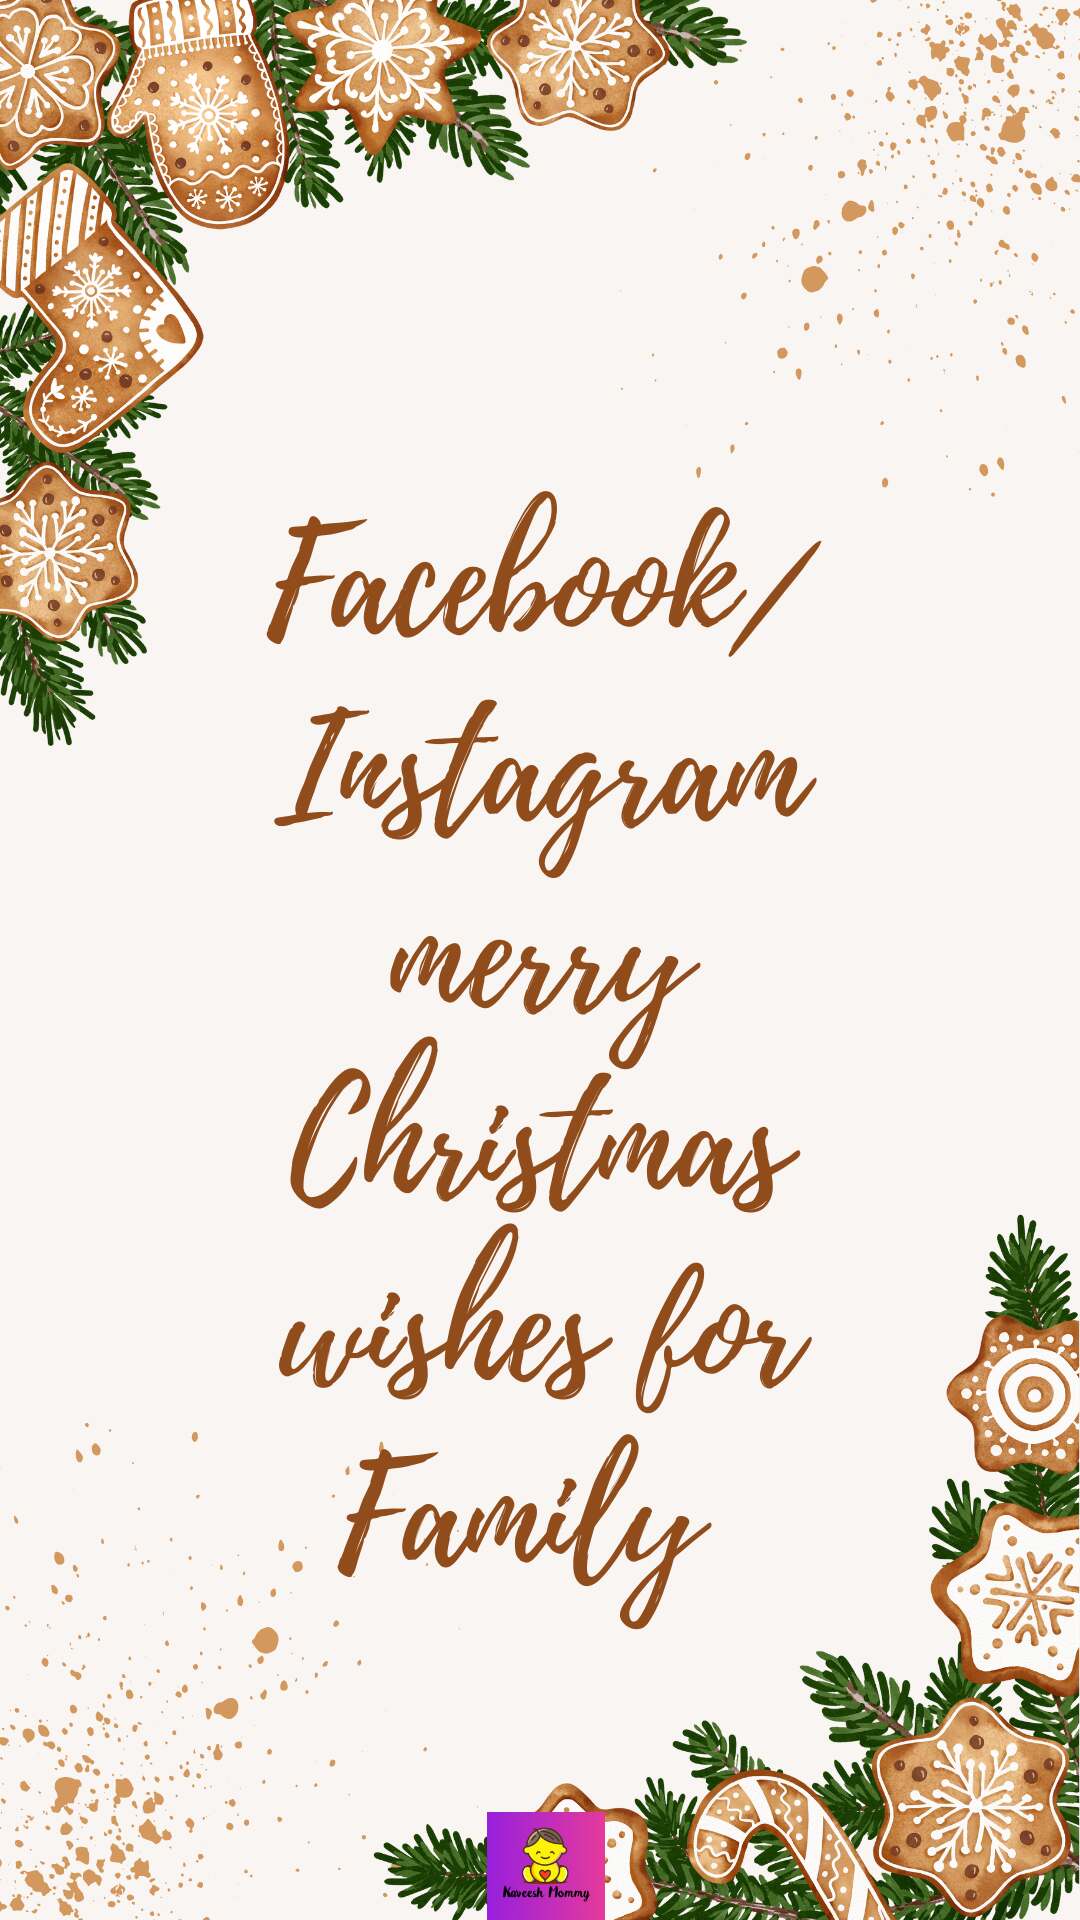 List of Facebook/Instagram merry Christmas wishes for Family